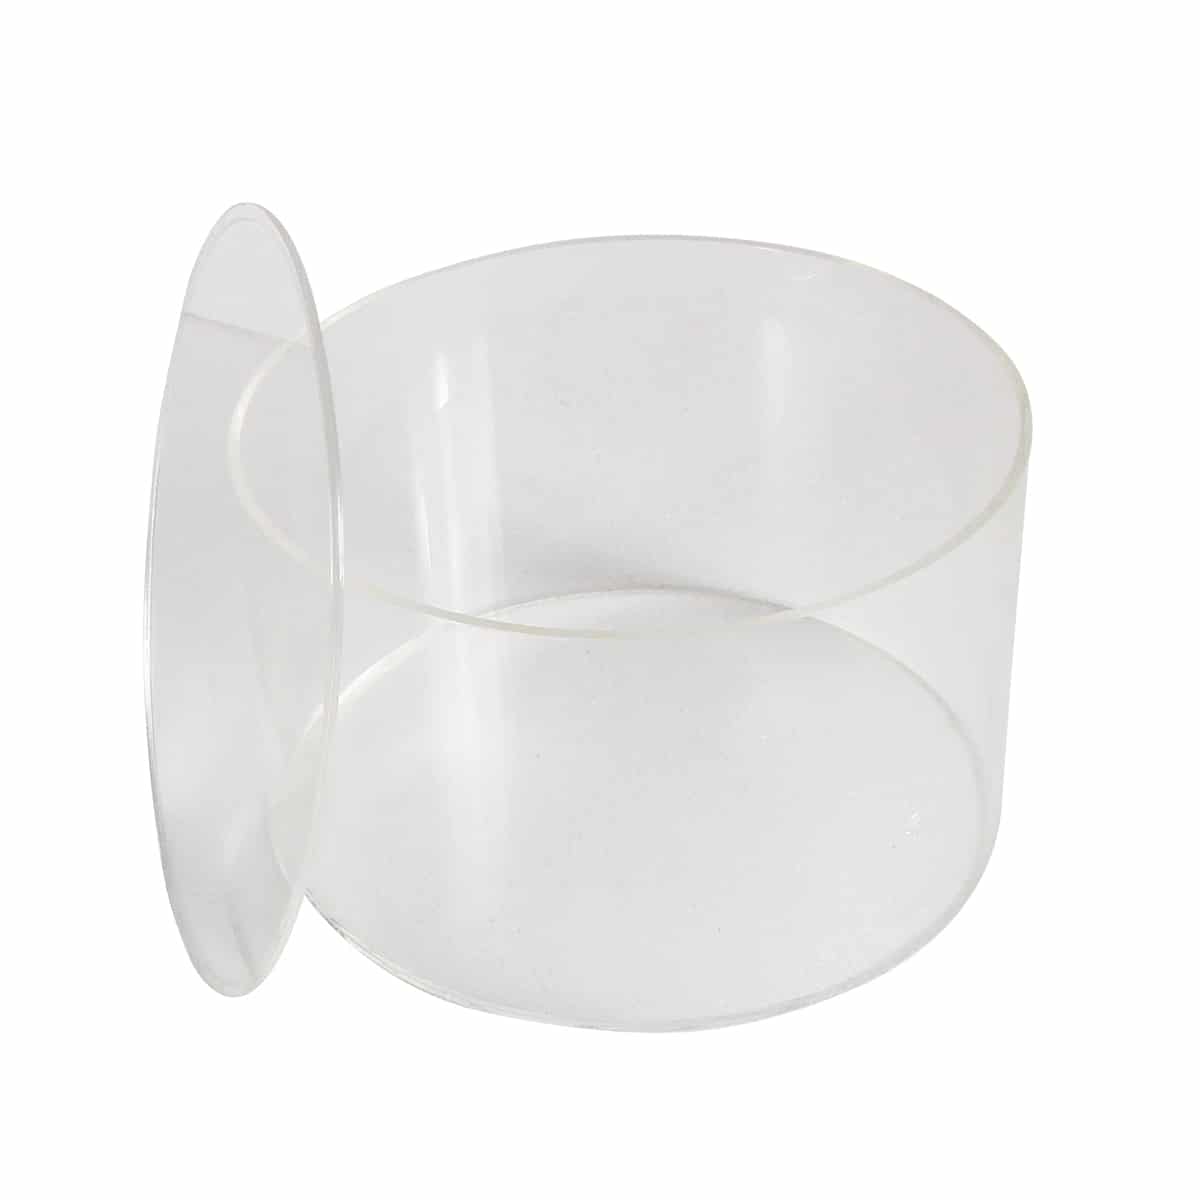 Acrylic Cake Riser Set - Clear cake display stand sets